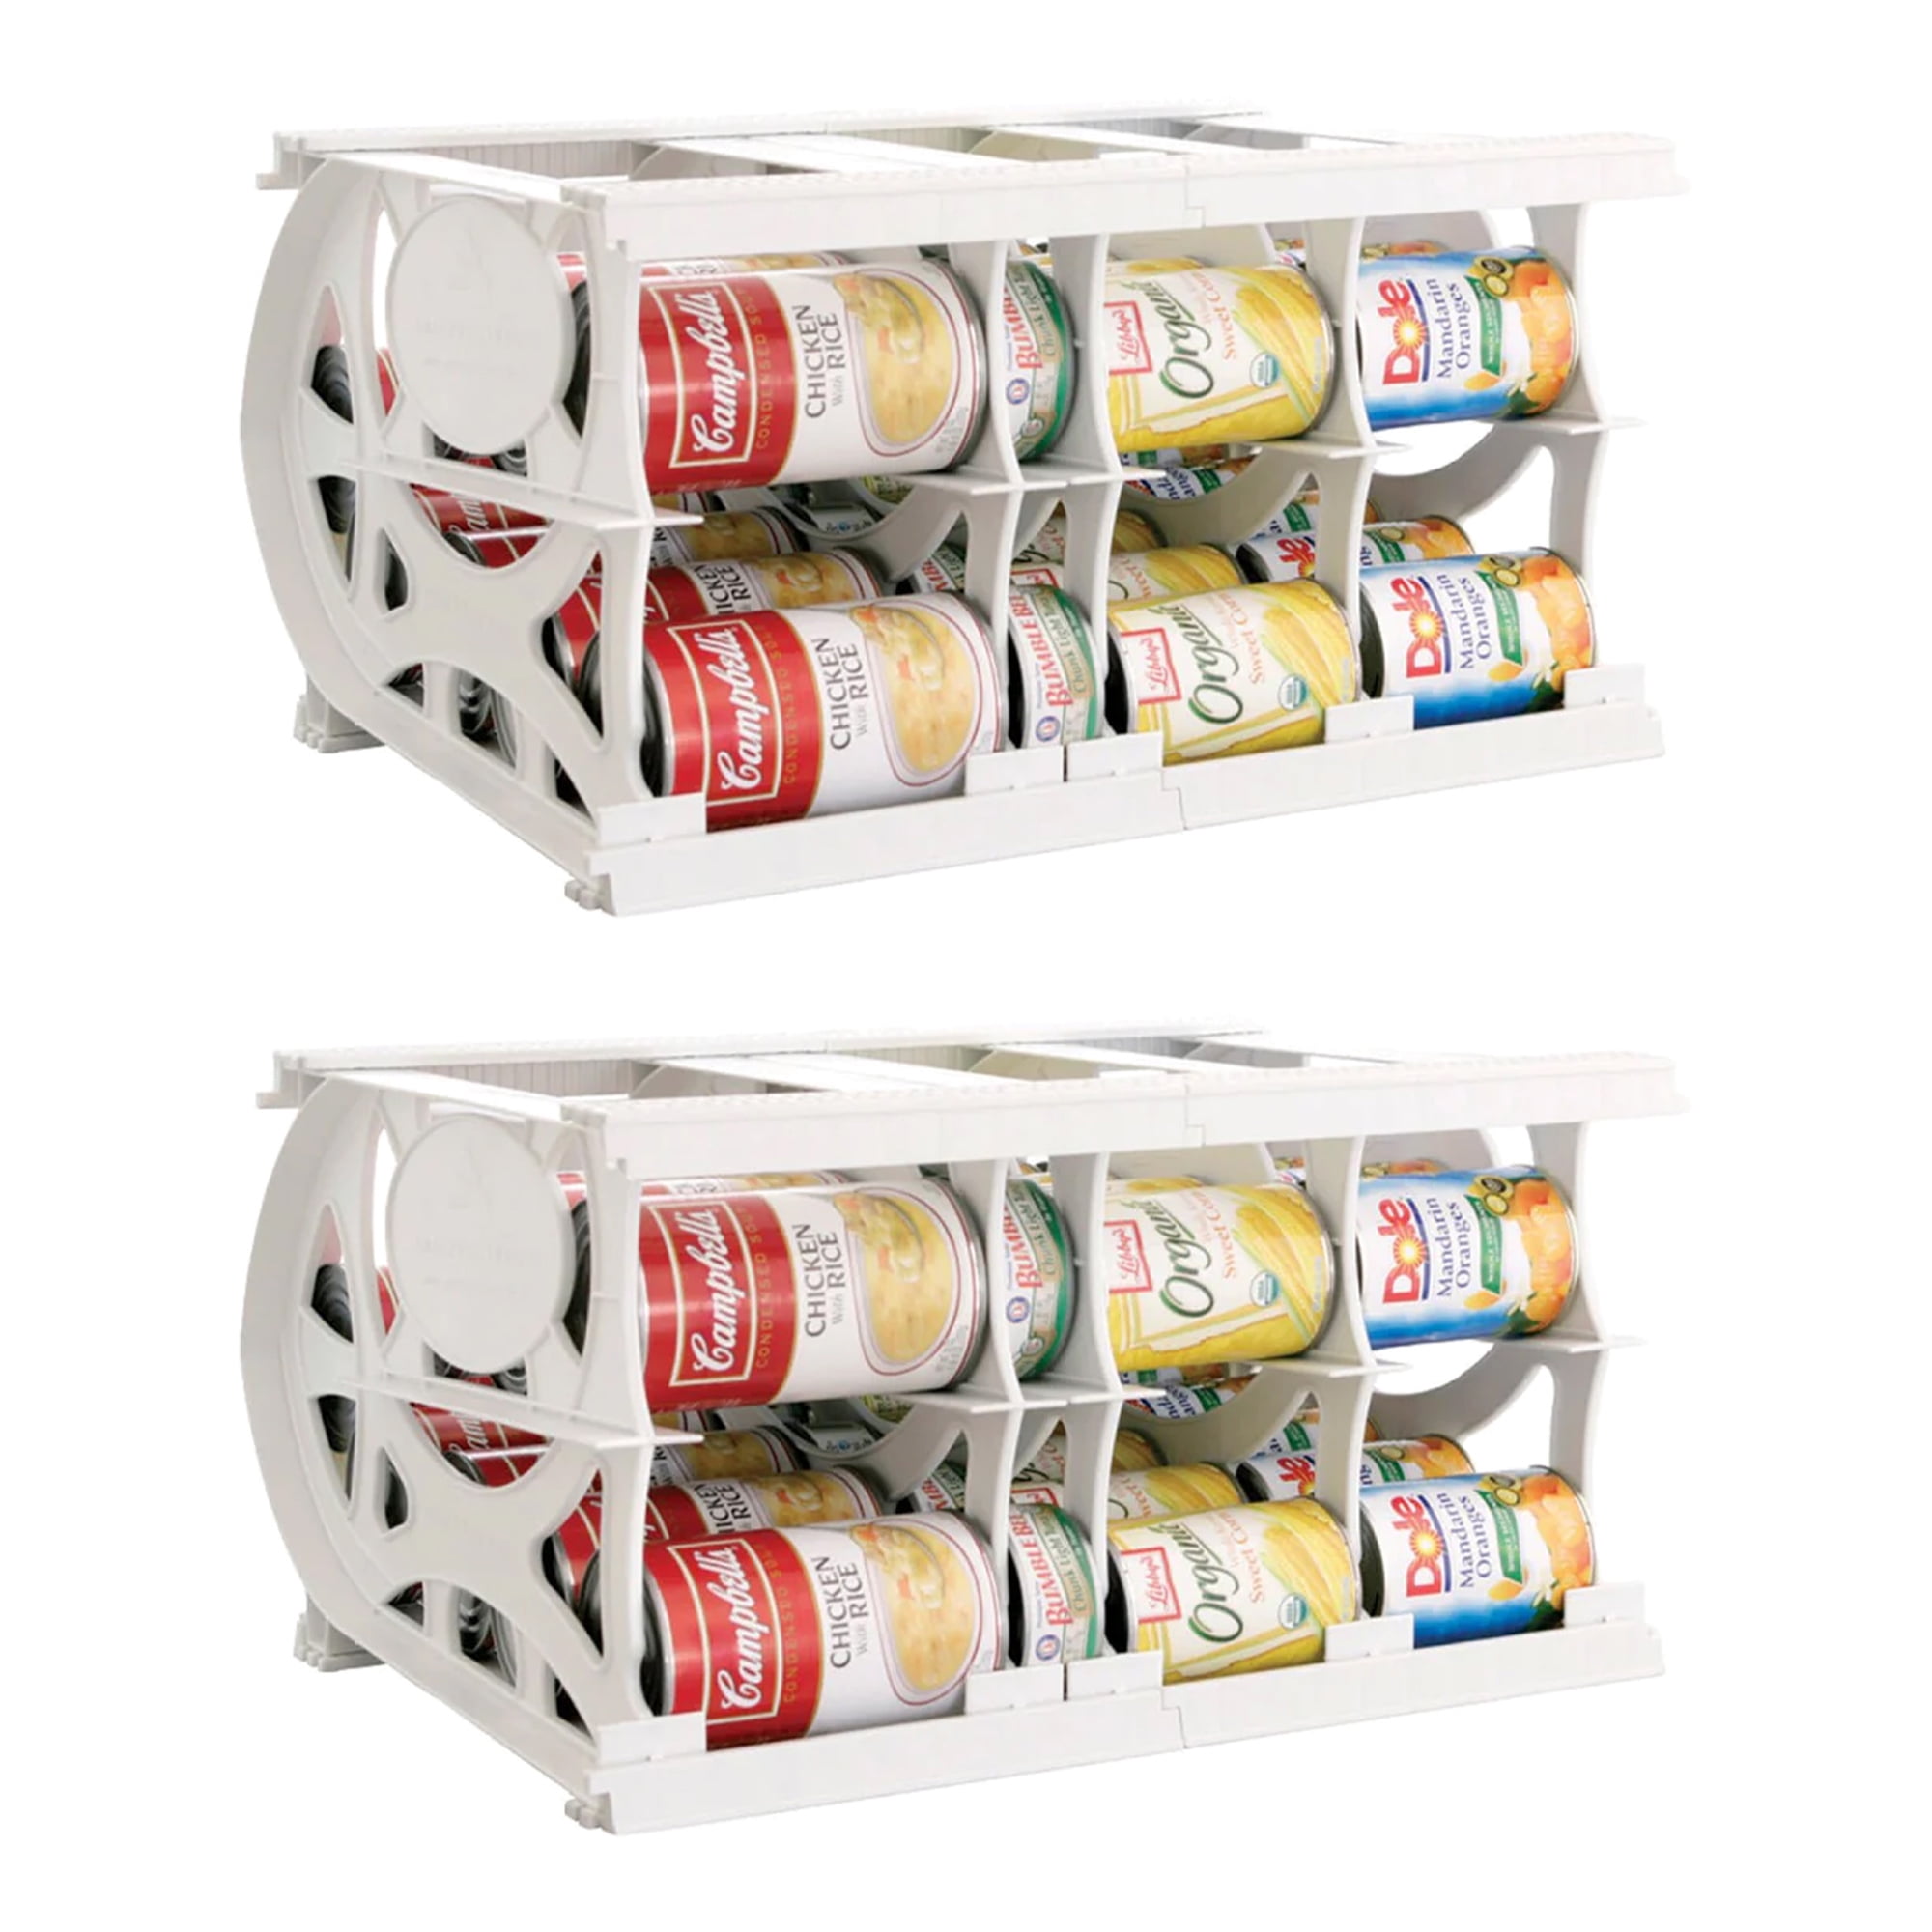 Shelf Reliance Cansolidator Pantry, 60 Can Storage Rotation System